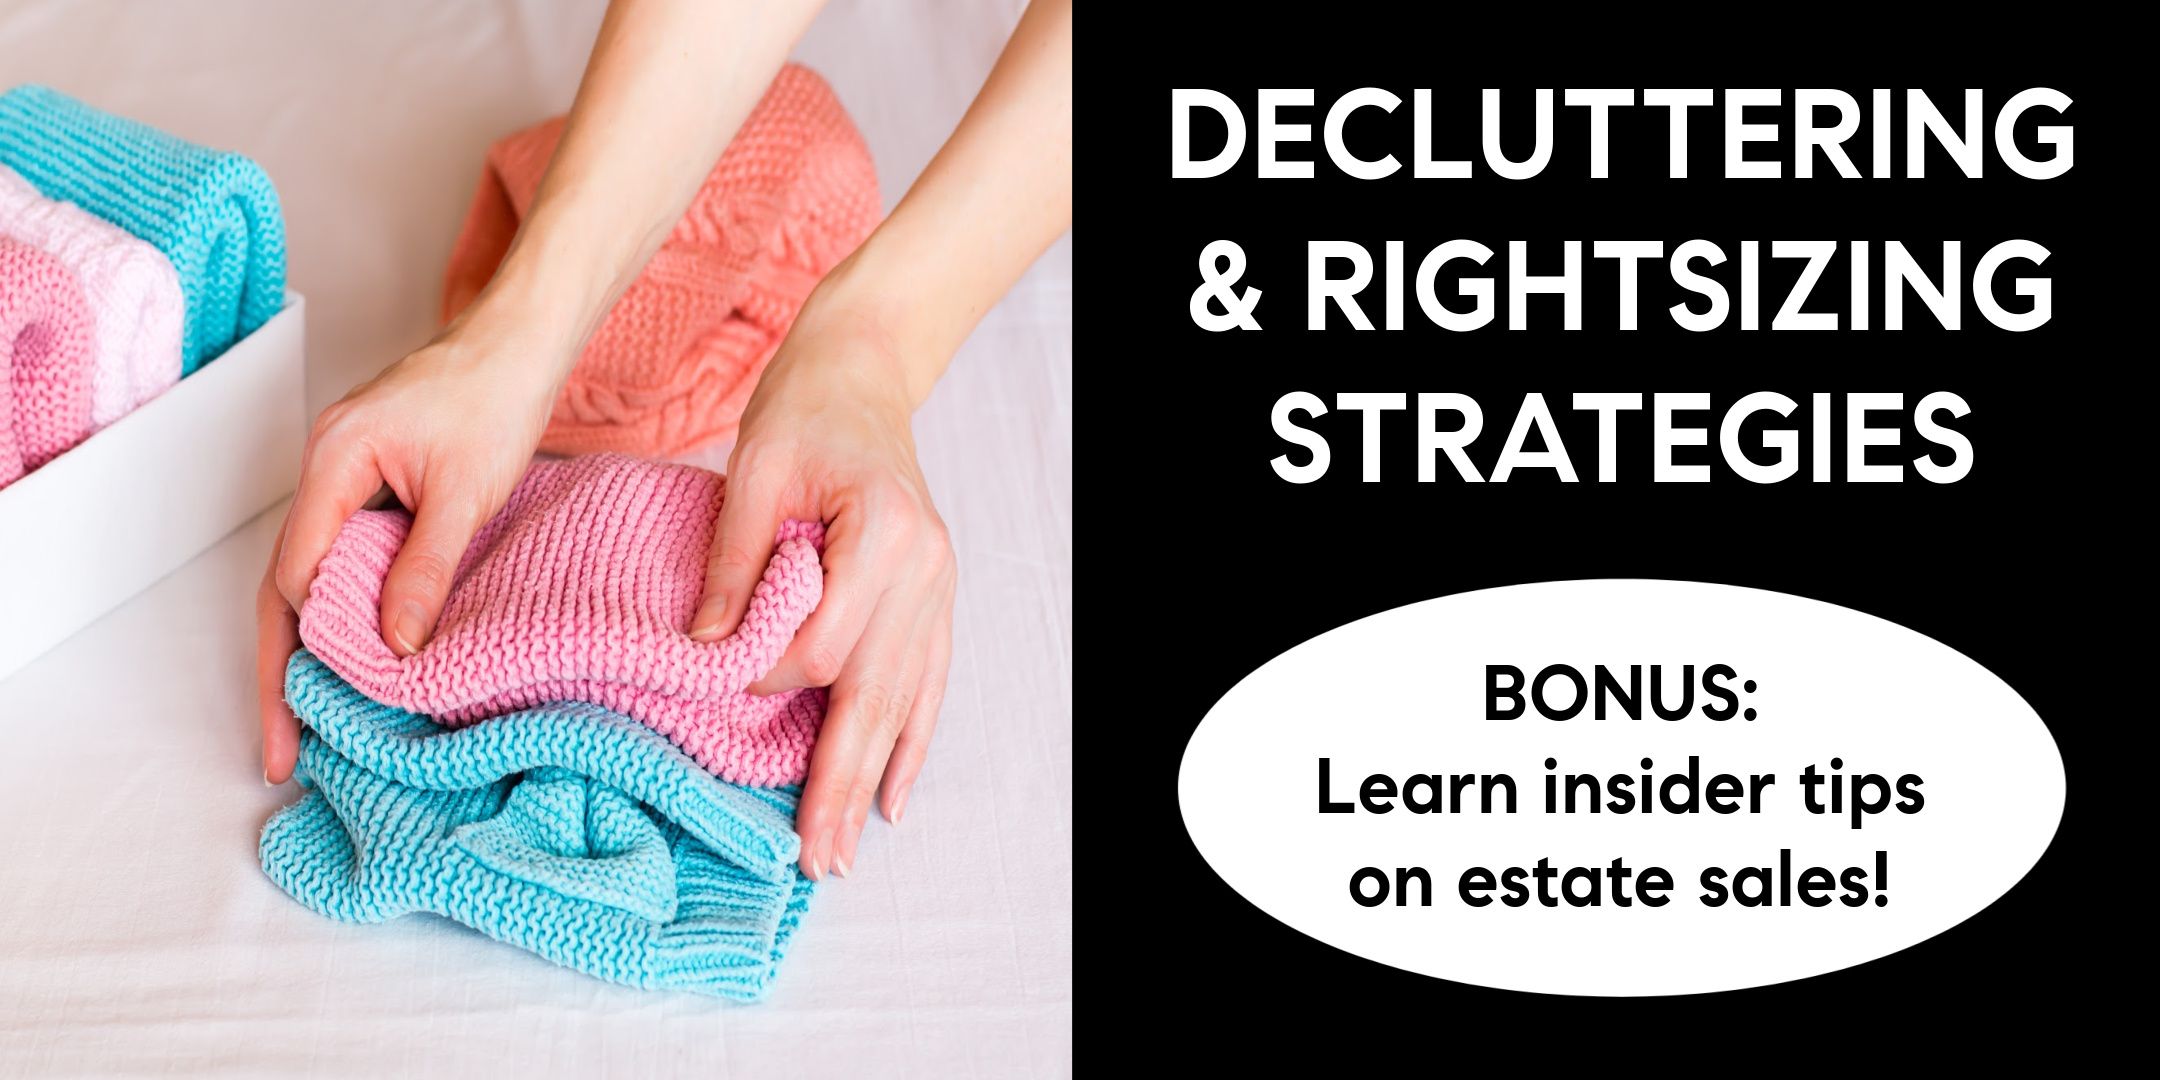 Free Seminar - Decluttering and Rightsizing